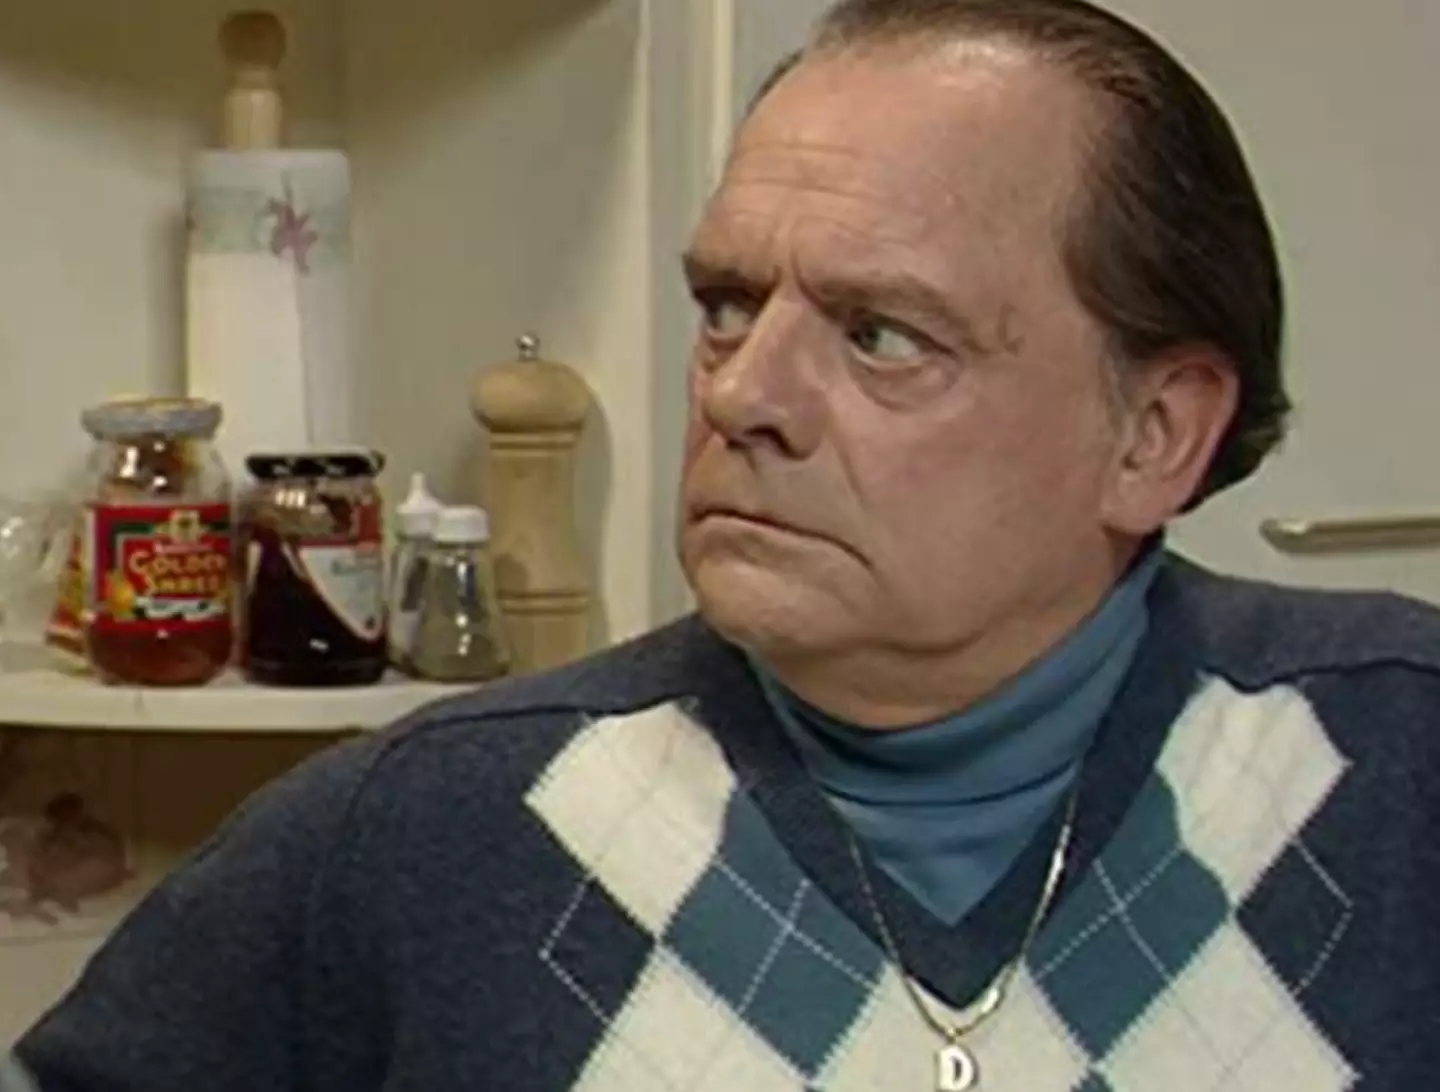 Sir David Jason is best known for starring in BBC series 'Only Fools and Horses'.